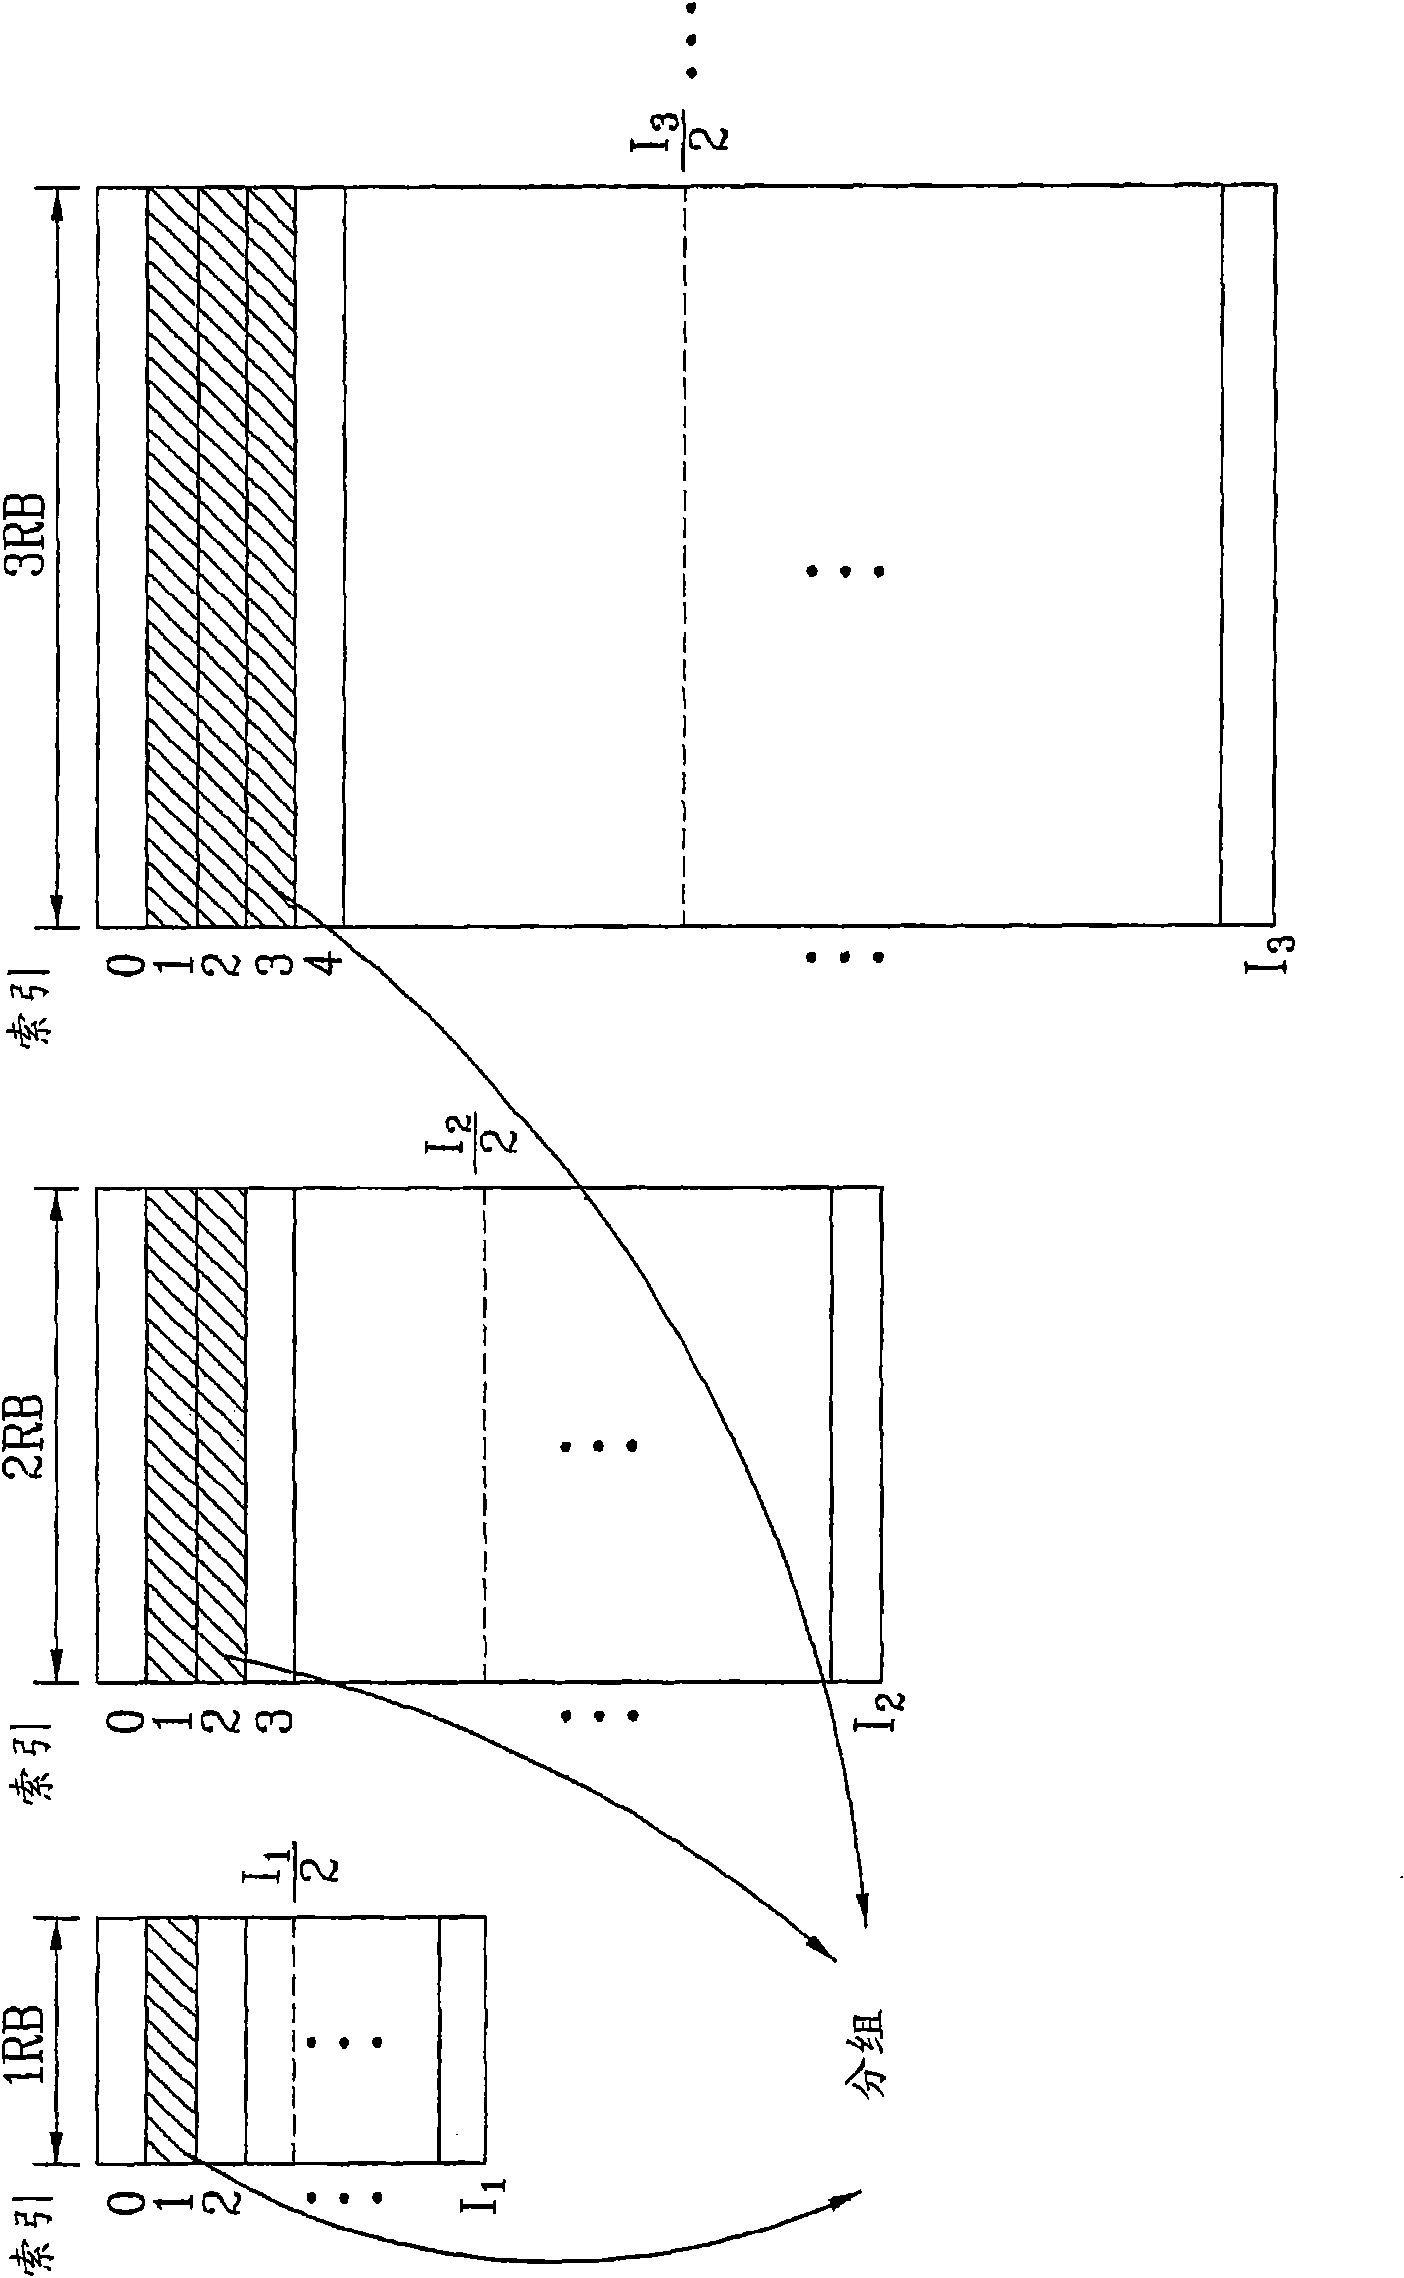 Method for generating a reference signal sequence using grouping